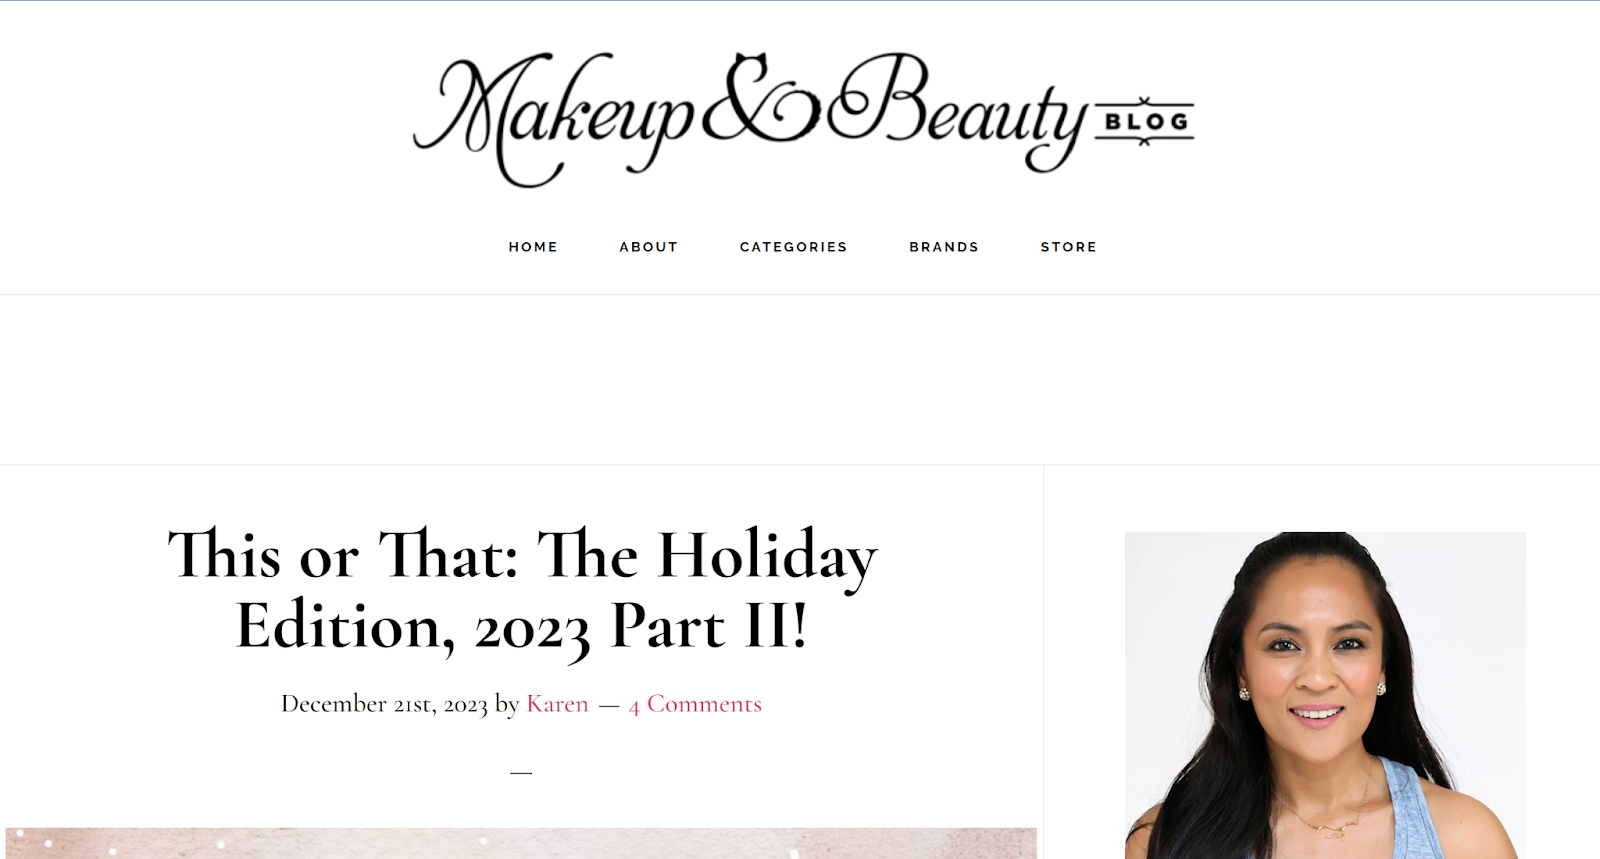 Makeup and Beauty Blog is a digital print magazine for beauty enthusiasts.